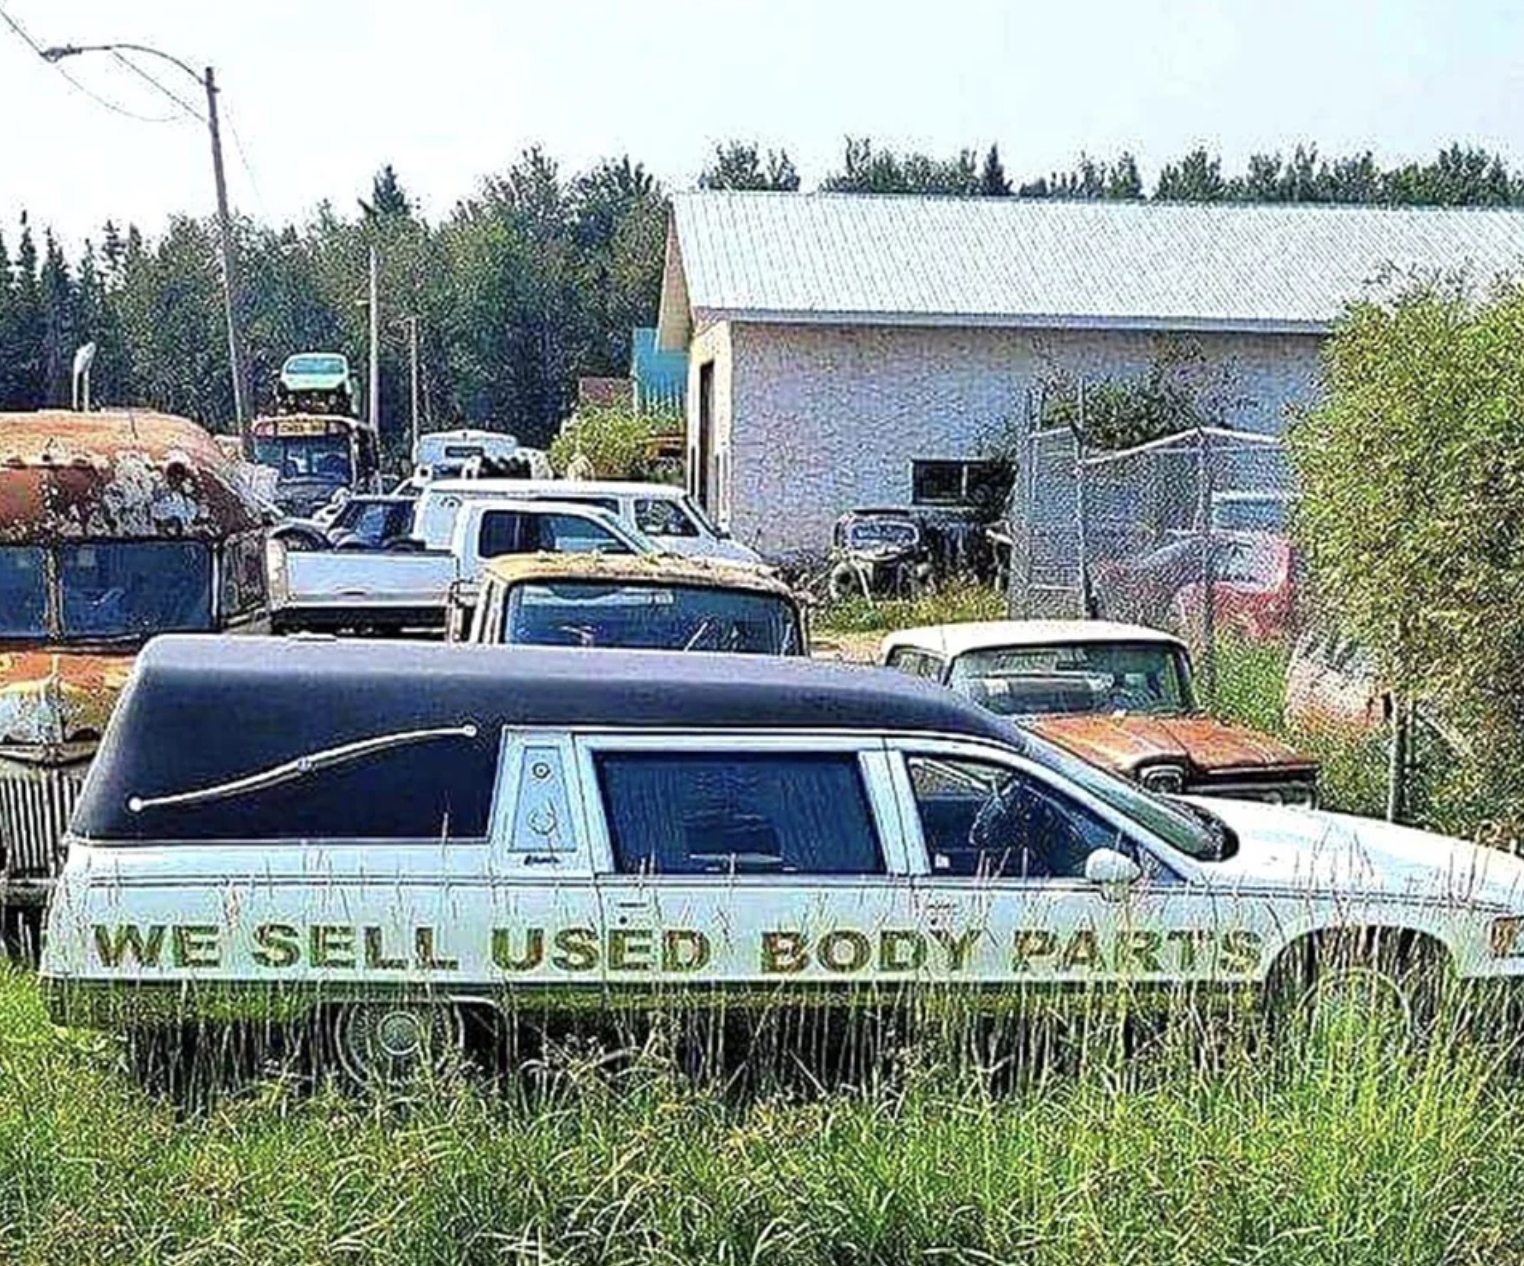 &quot;We sell used body parts&quot;